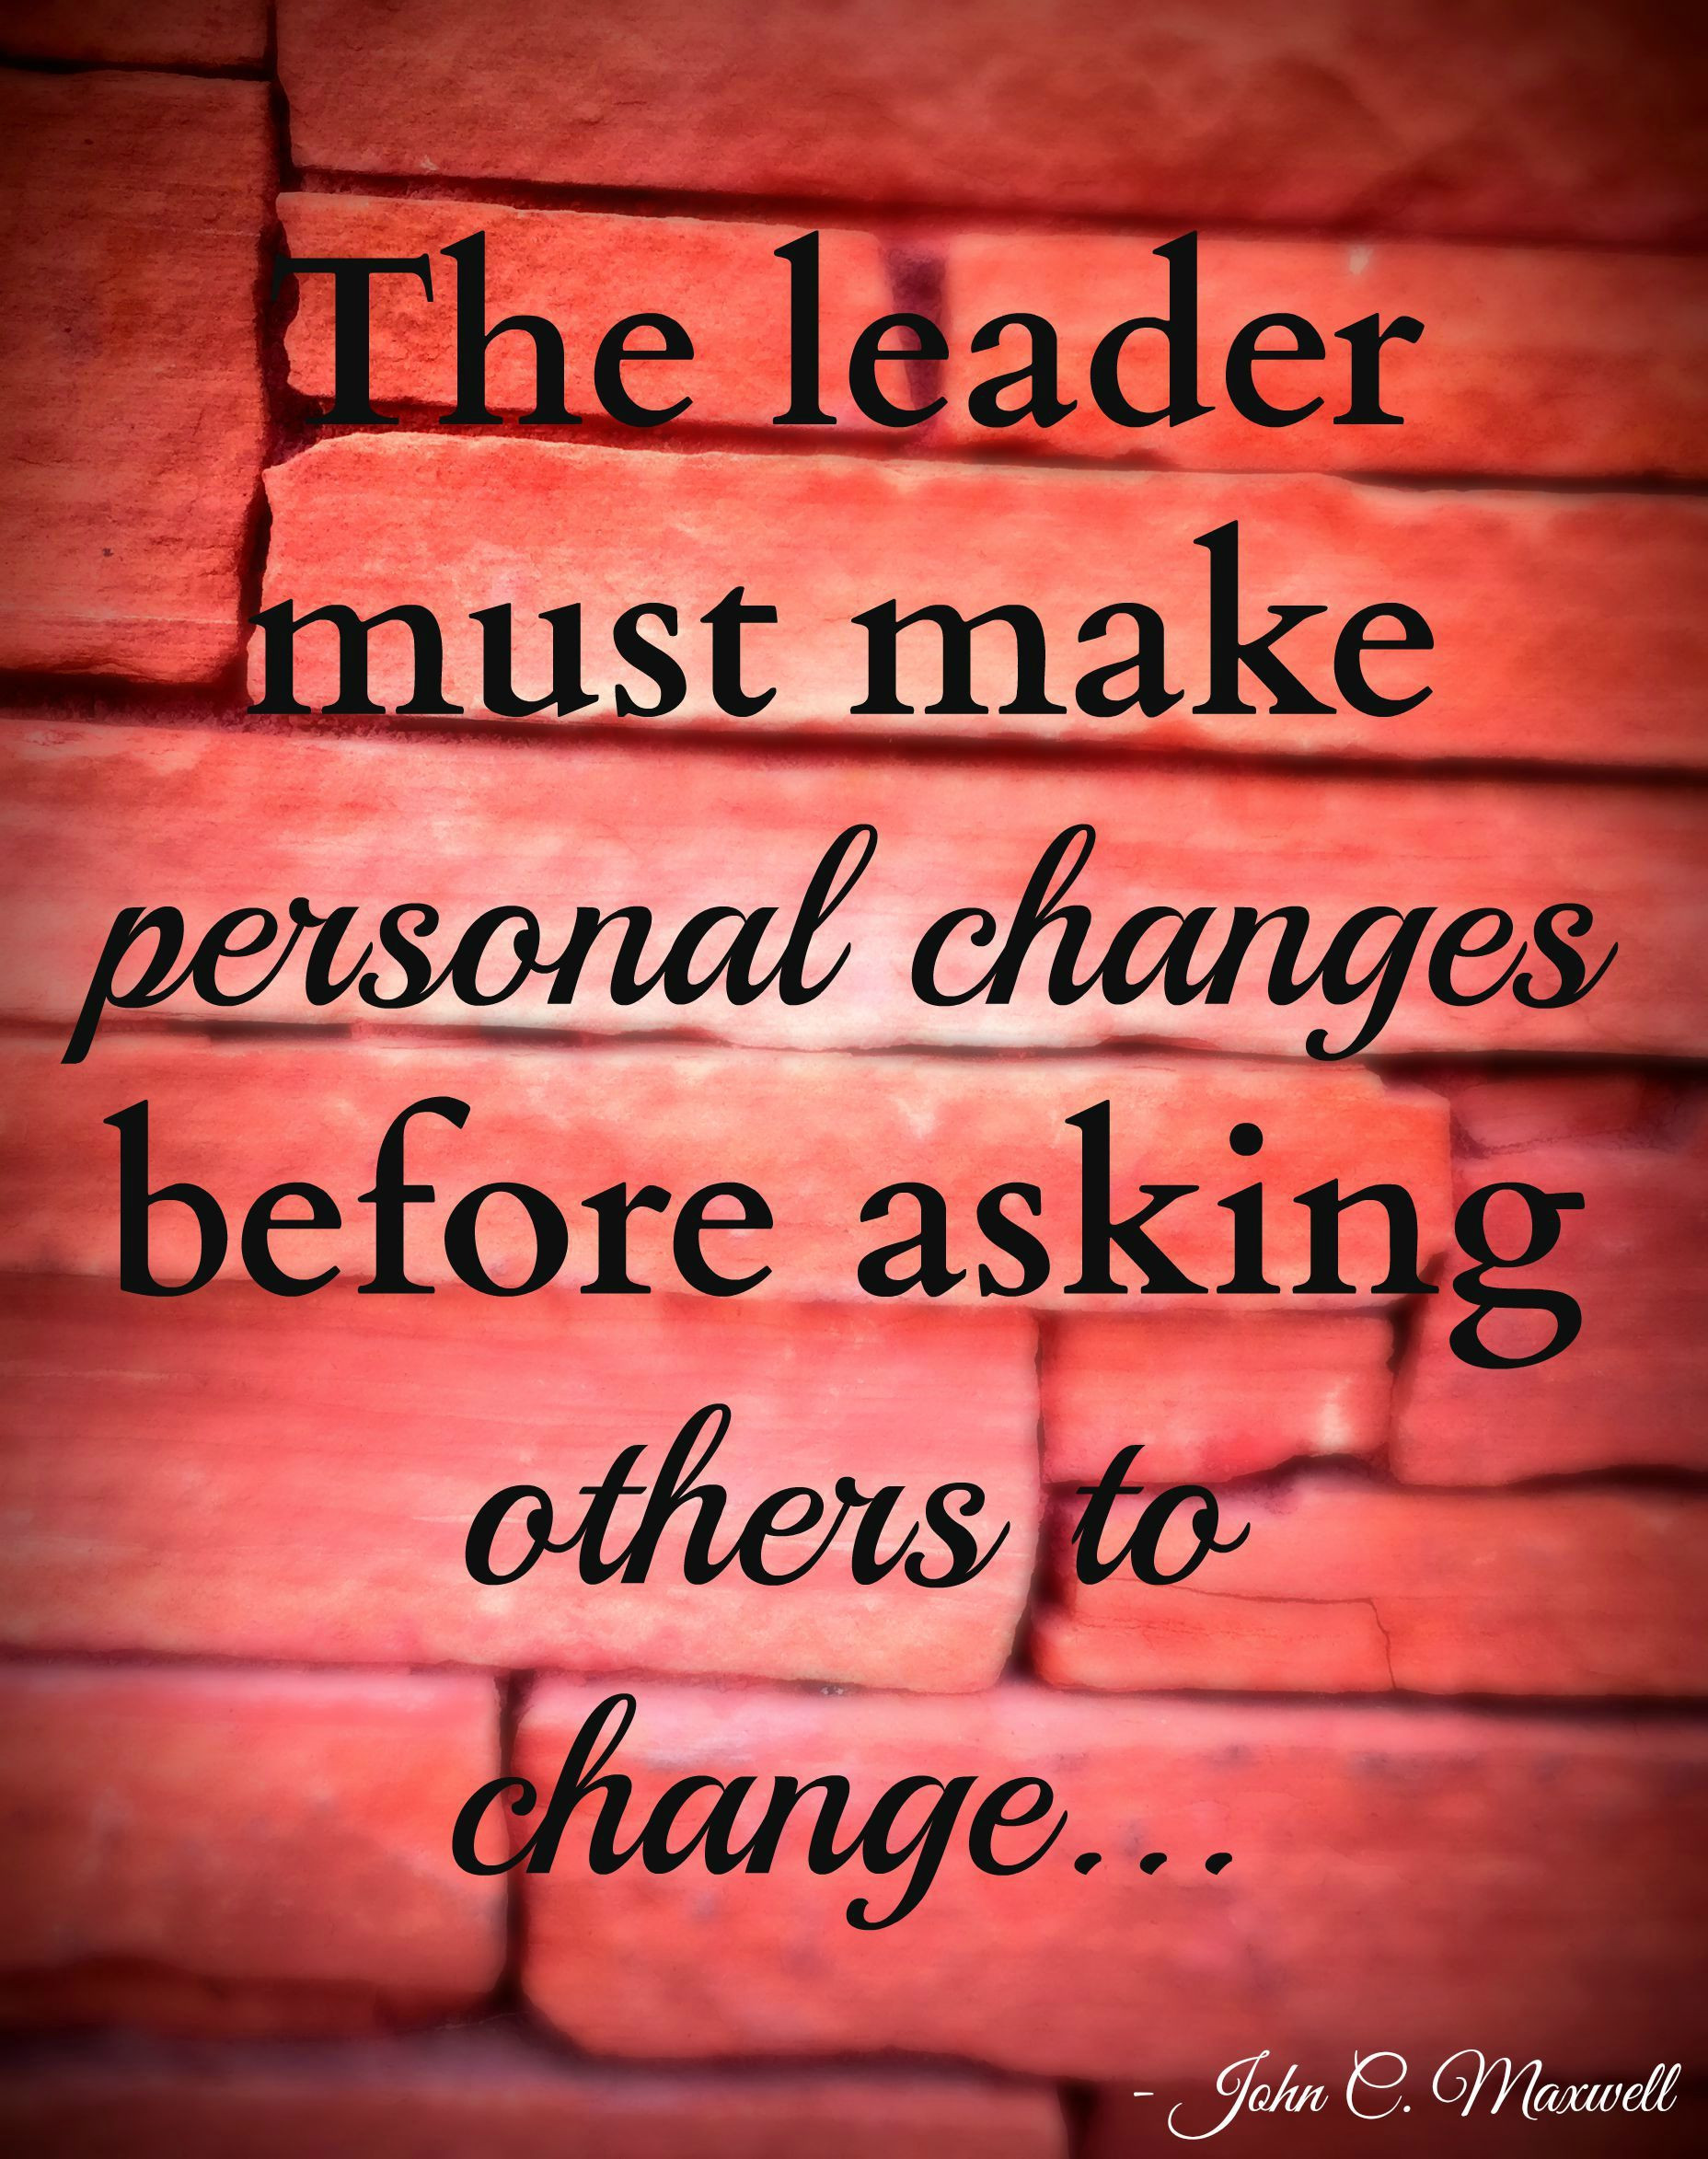 Quotes On Leadership And Change
 The leader must make personal changes before asking others